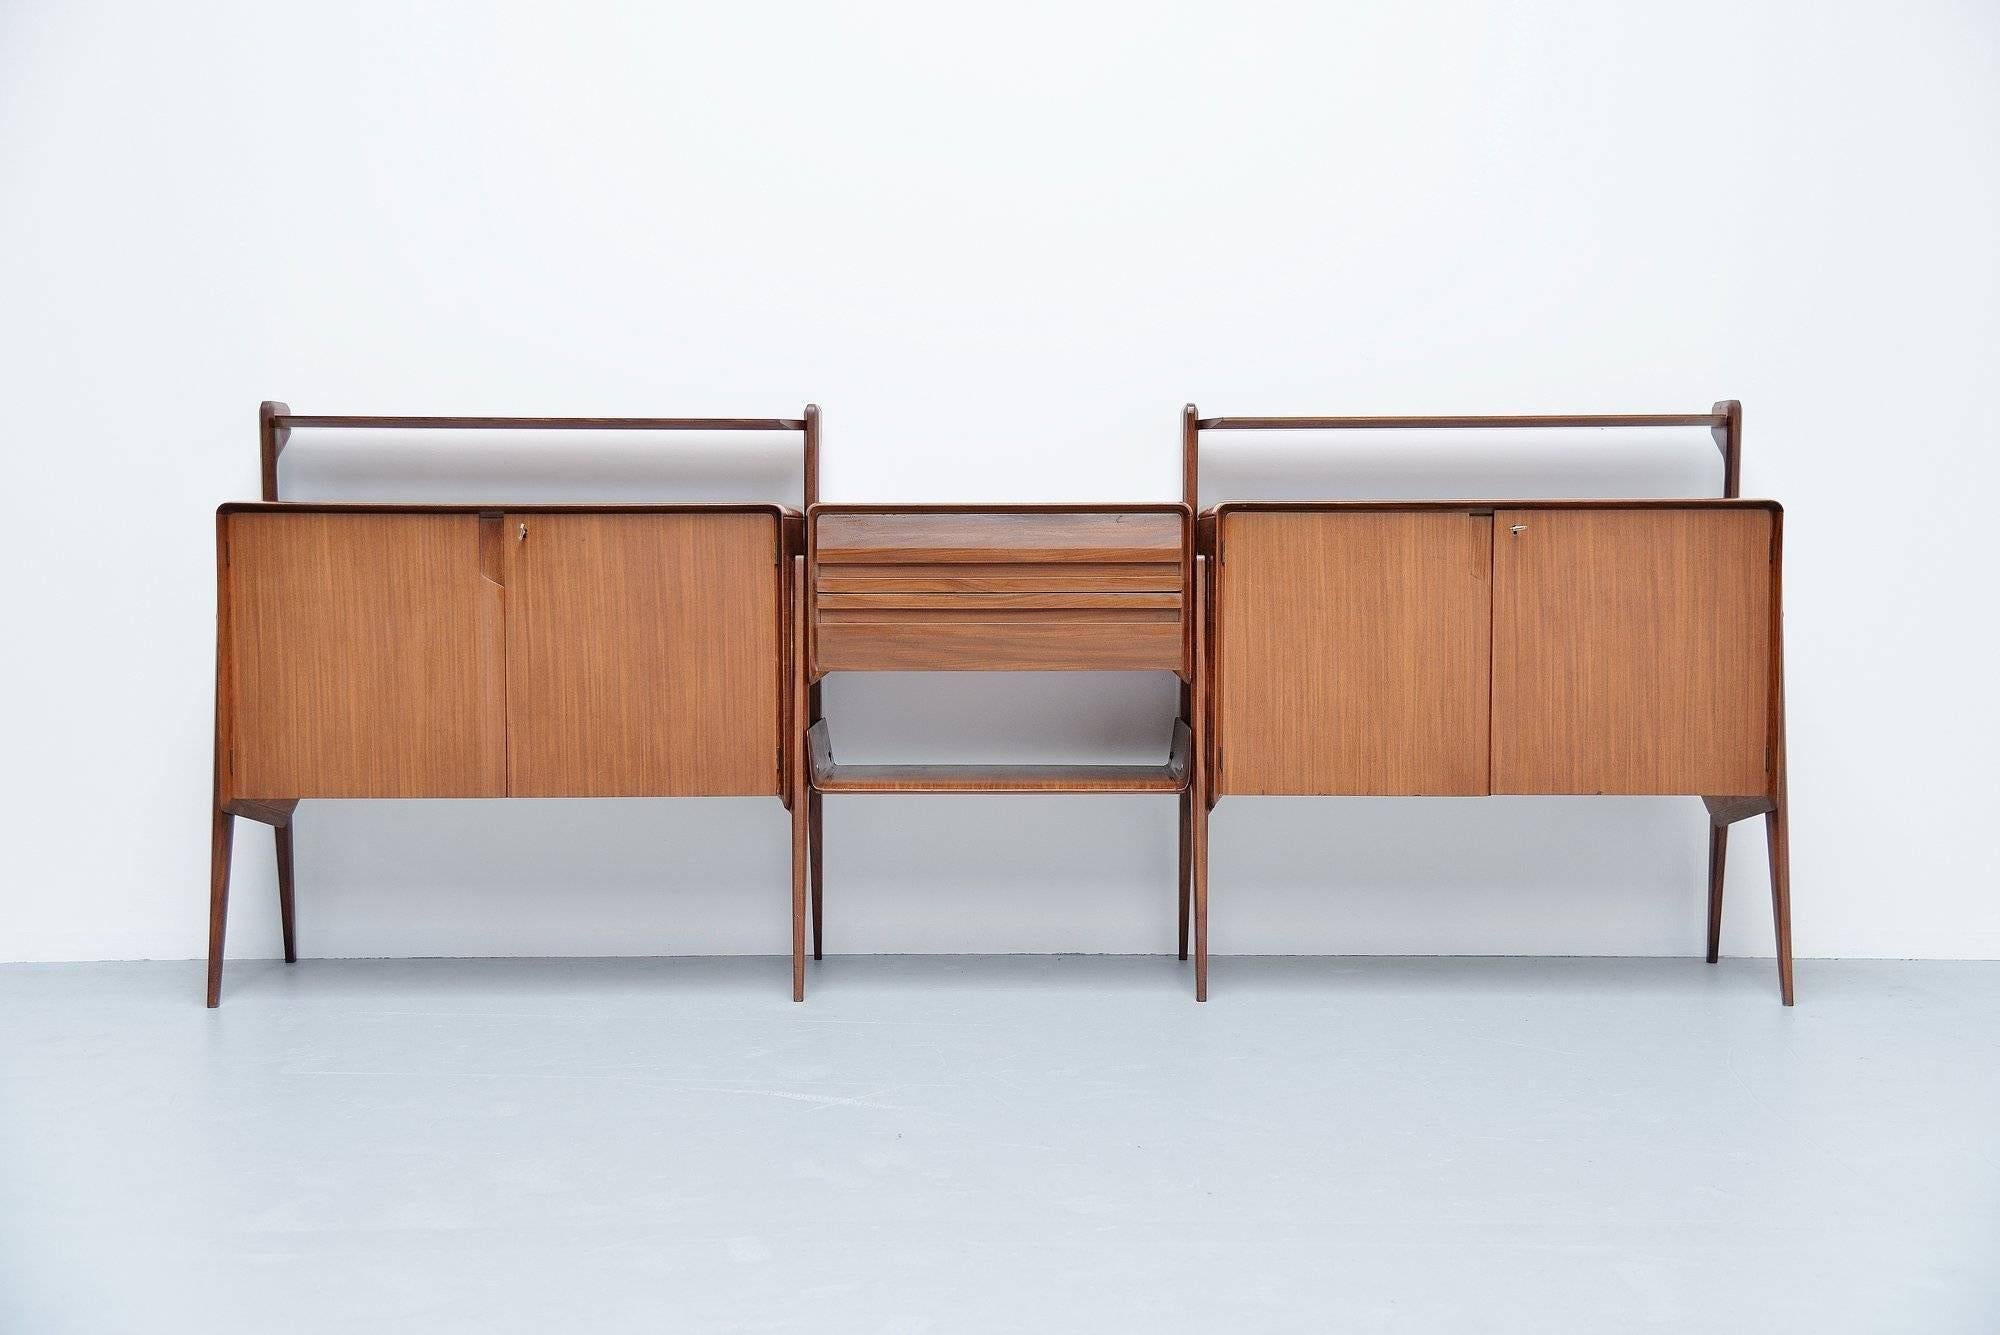 Amazing long and functional sideboard attributed to Ico e Luisa Parisi and manufactured by Cantu, Italy, 1955. This fantastic refined piece of Italian design is made of teak and has typical Italian Ico Parisi lines. The sideboard is in fantastic